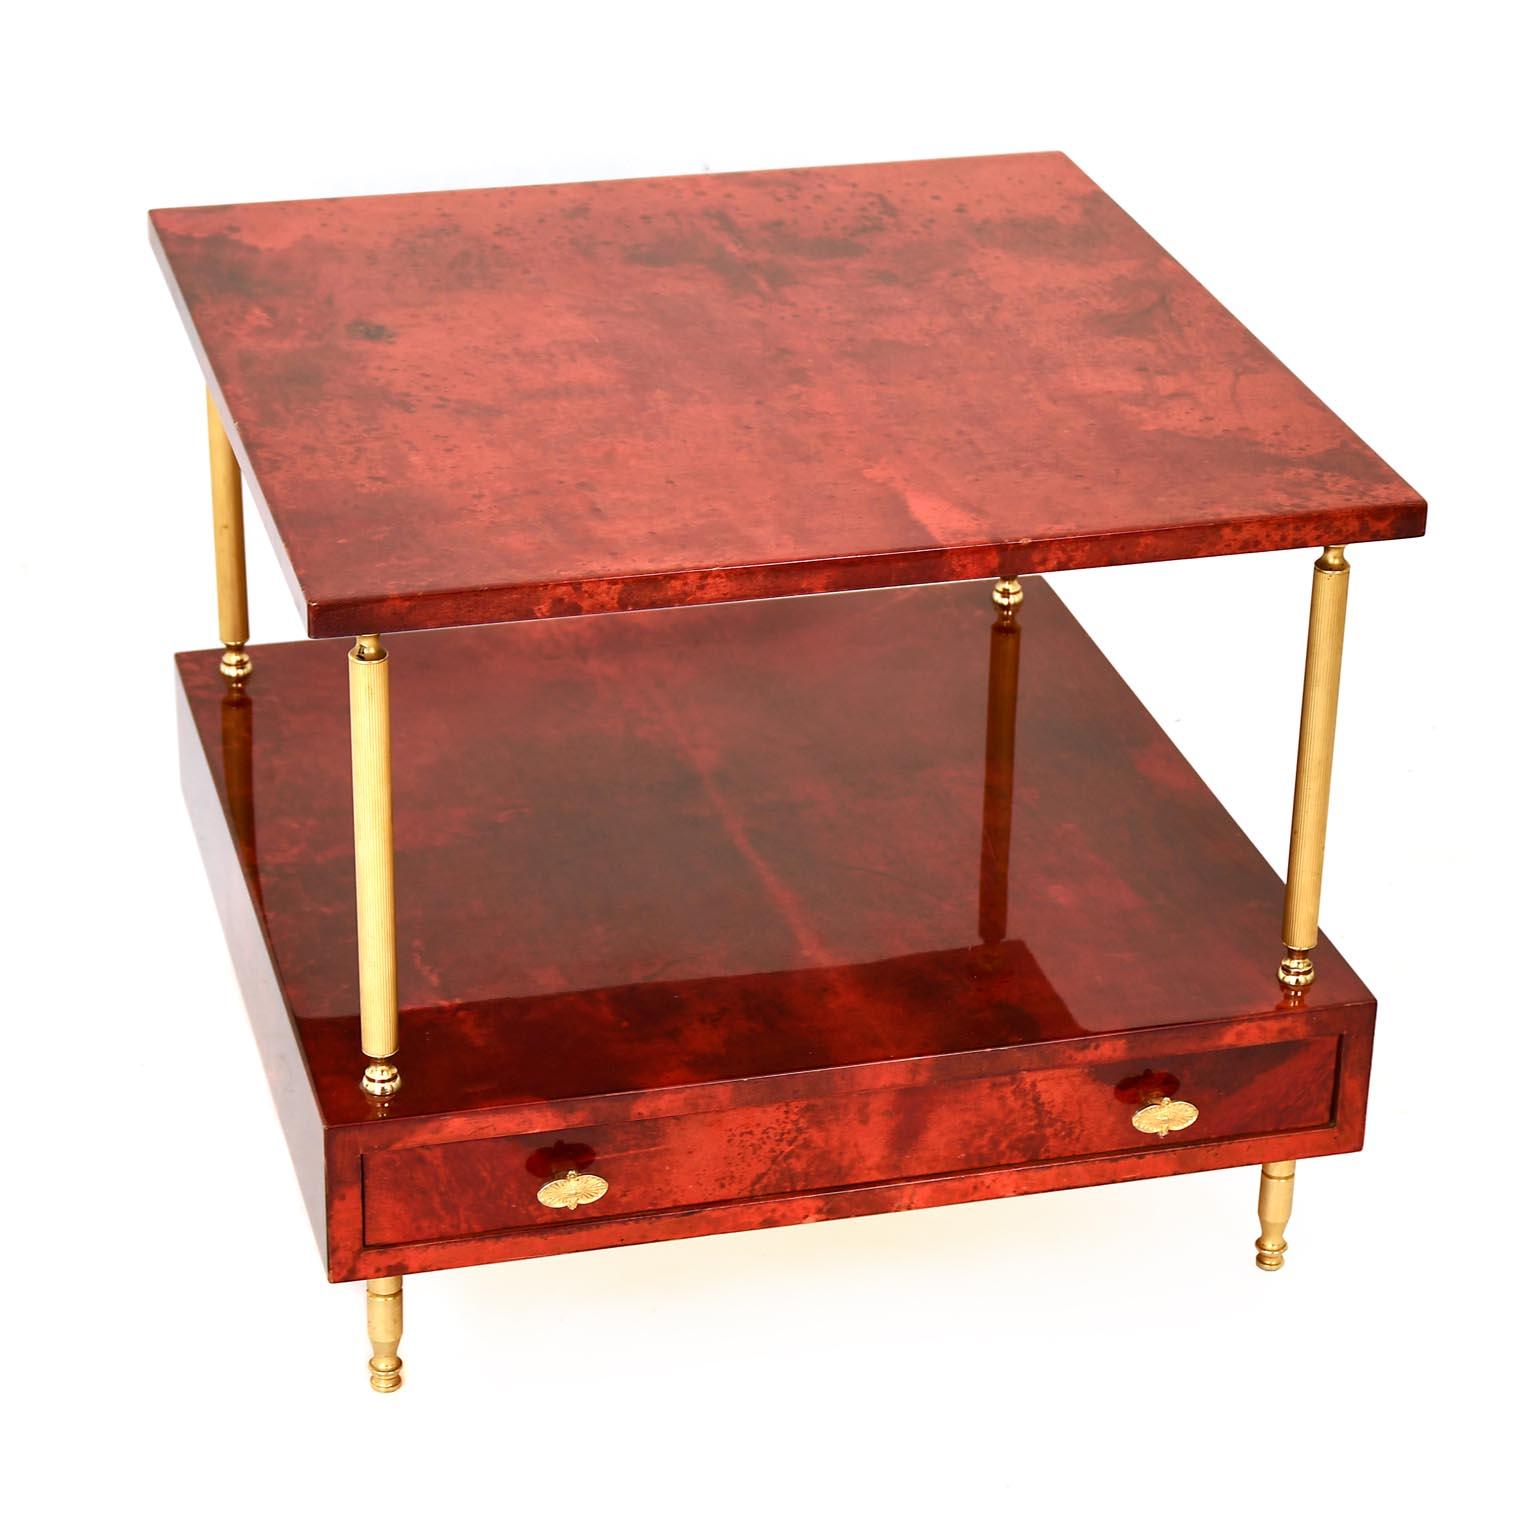 Mid-Century Modern Coffee Table Aldo Tura Red Goatskin, Italy 50's, Brass Mid-Century Signed For Sale